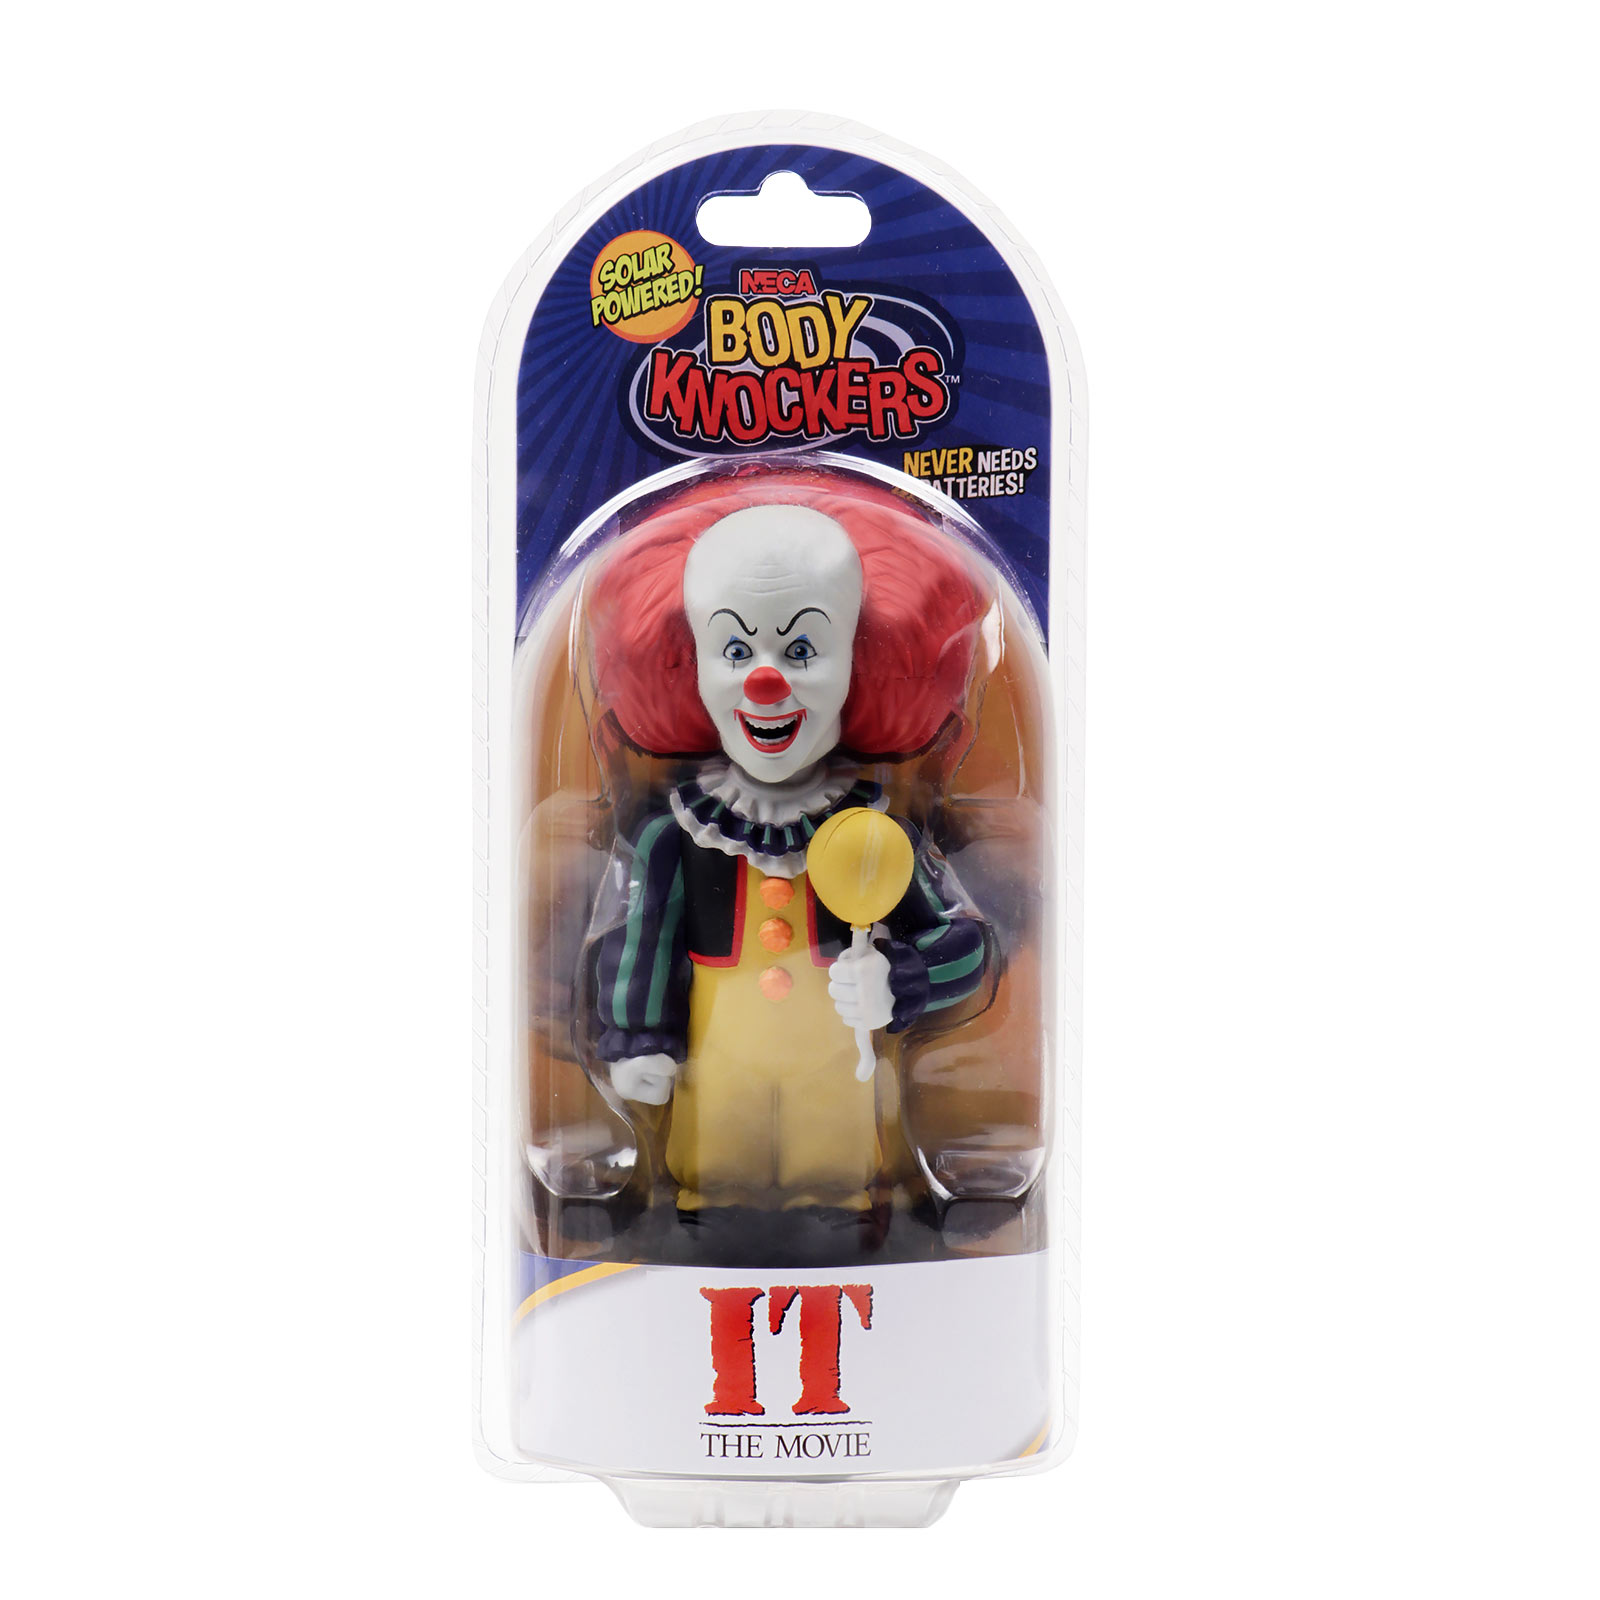 Stephen King's IT - Pennywise 1990 Body Knockers Zonnebobblehead